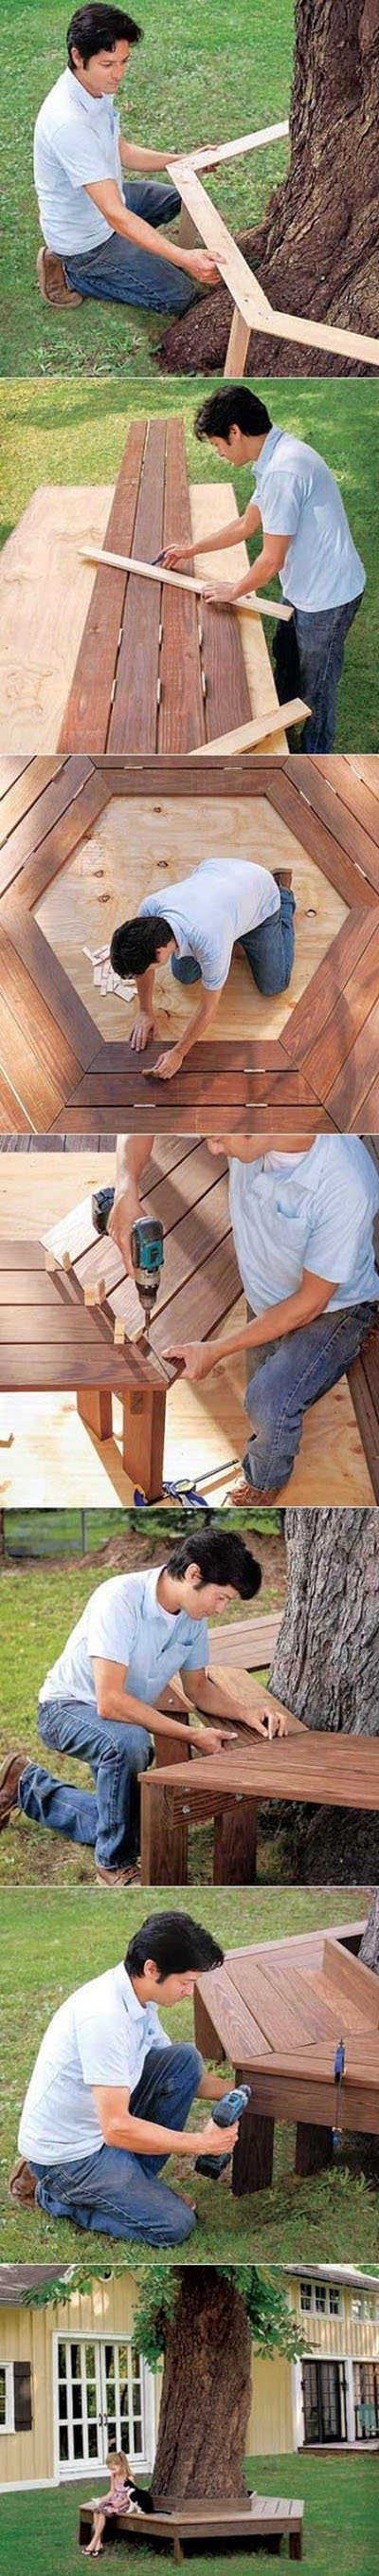 7 How to build a bench around a tree 892a677